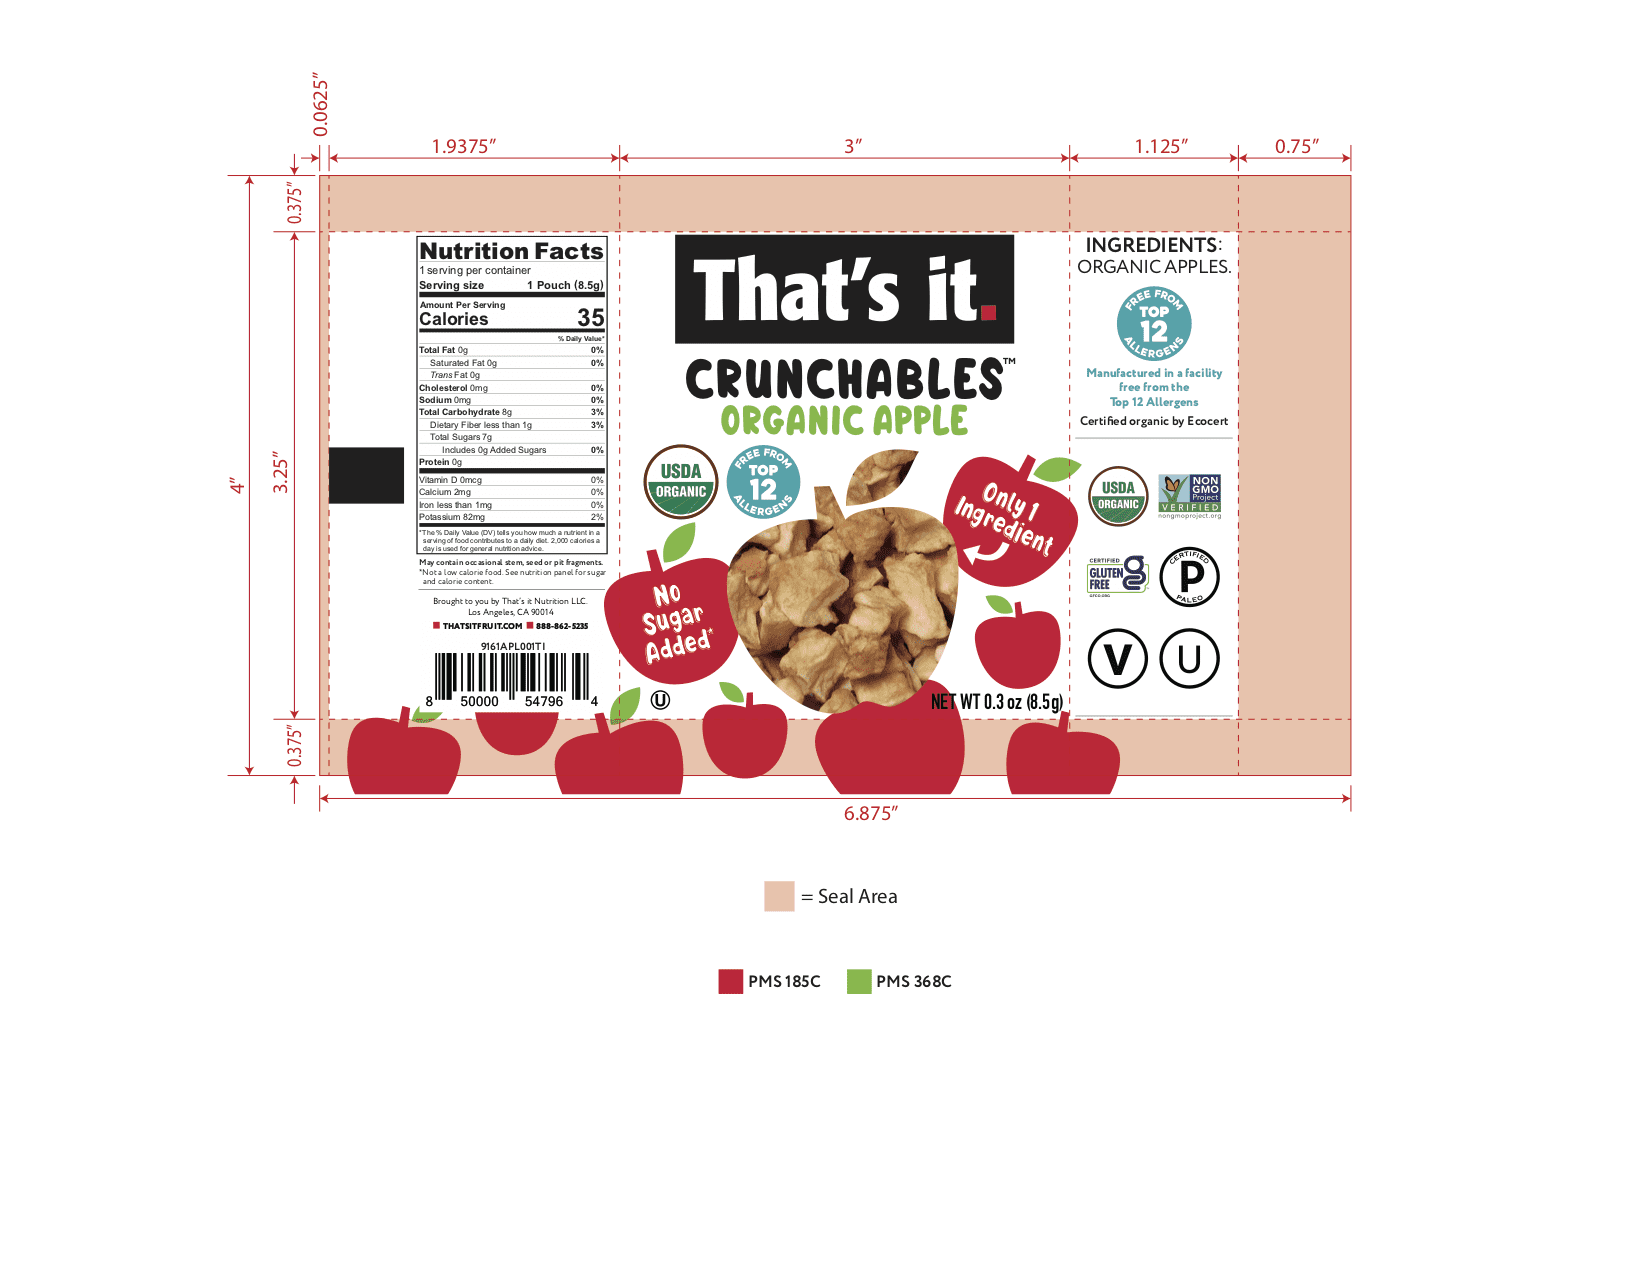 That's It Crunchables Organic Apple 6 innerpacks per case 2.4 oz Product Label